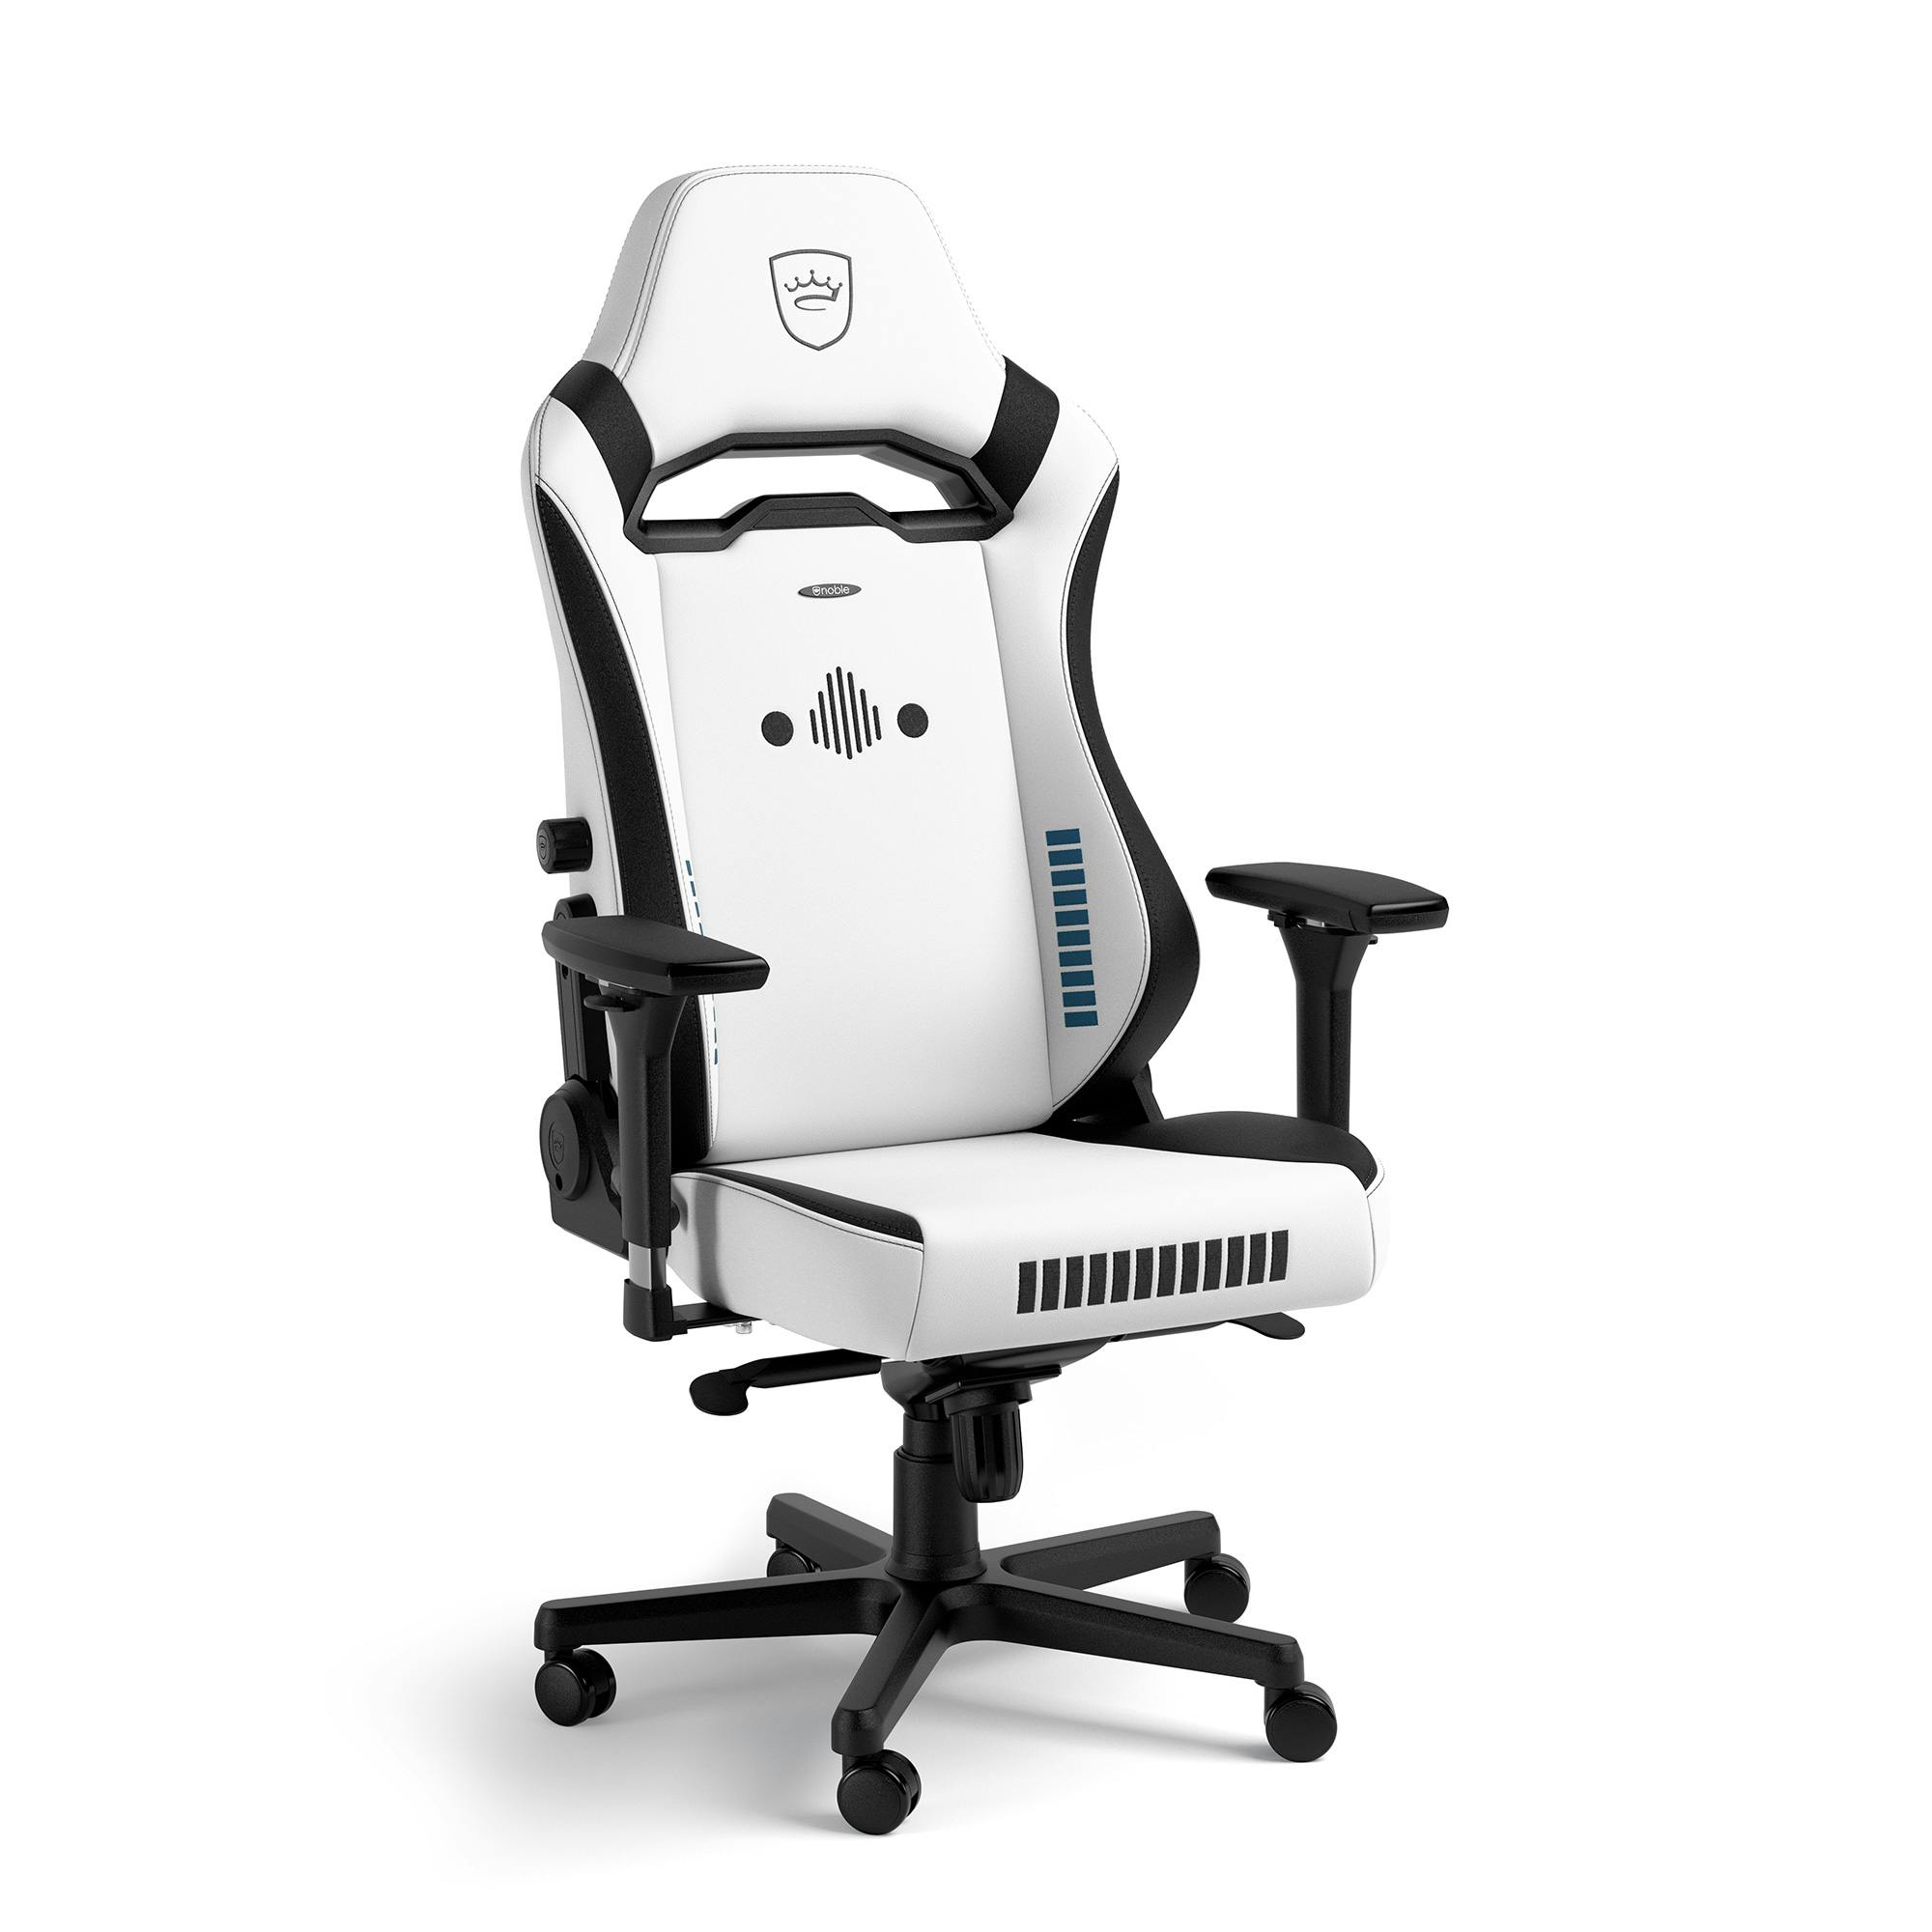 noblechairs - HERO ST Stormtrooper Edition